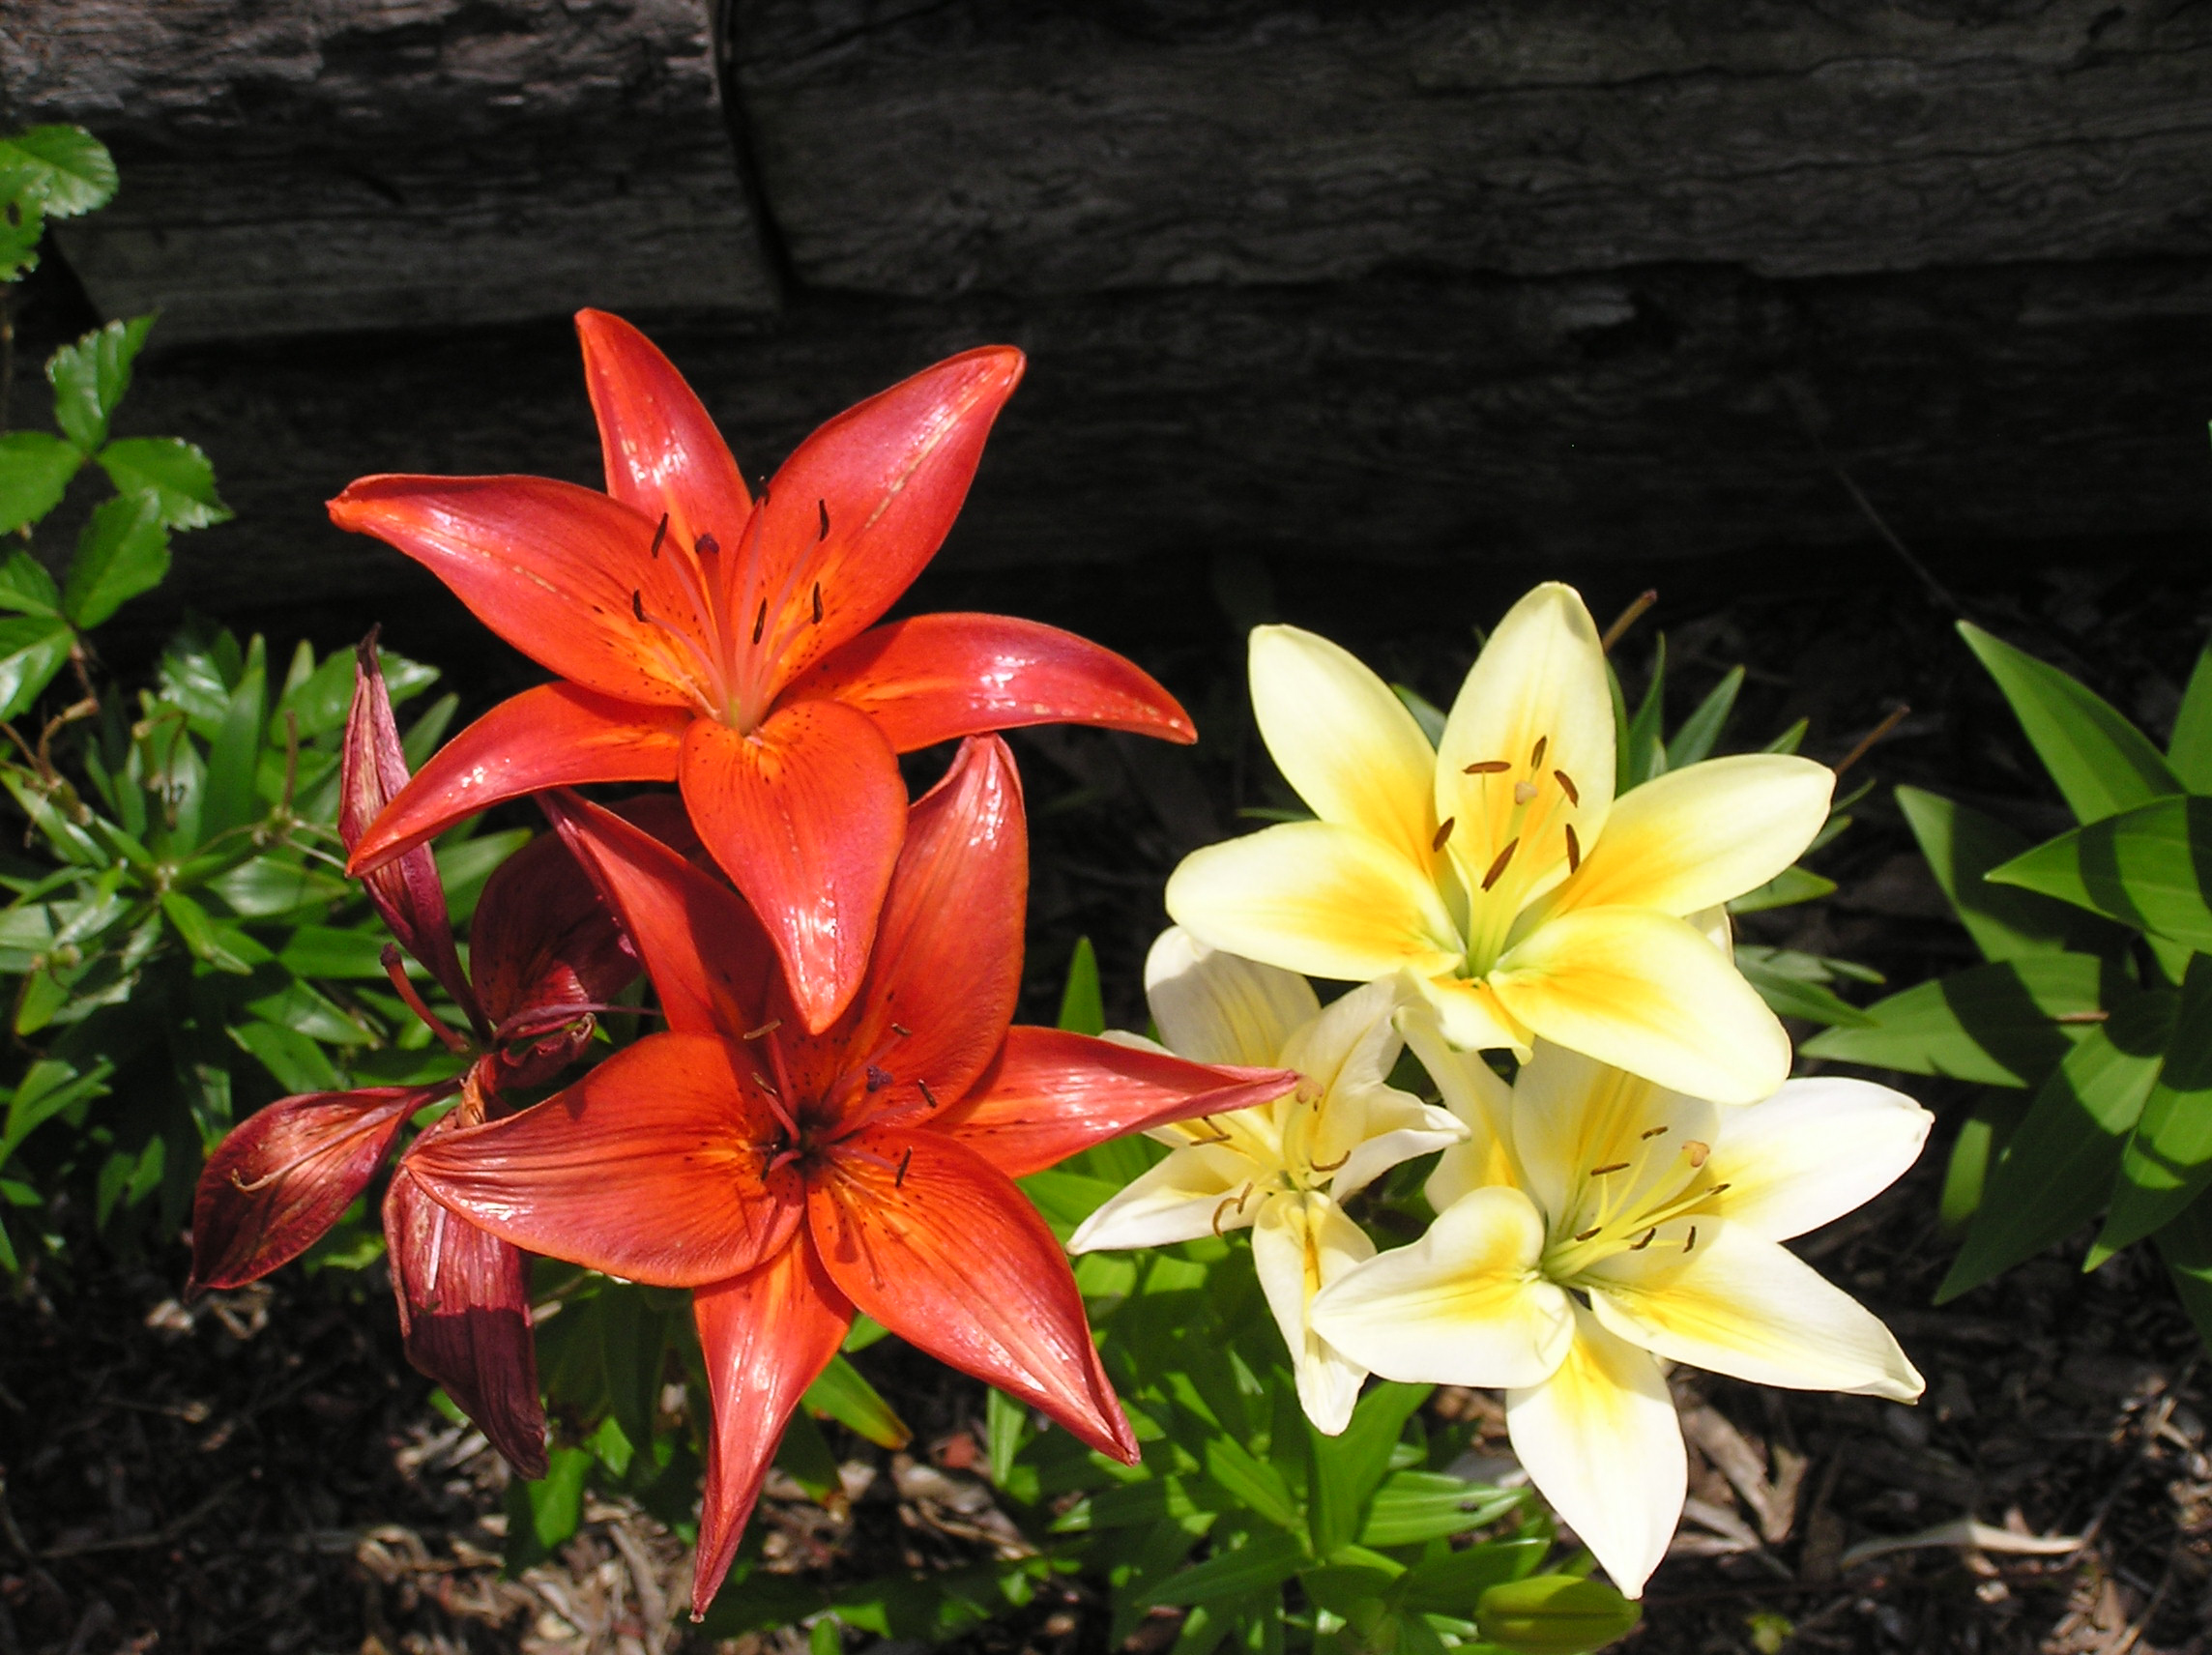 Variety of Tiger Lilies